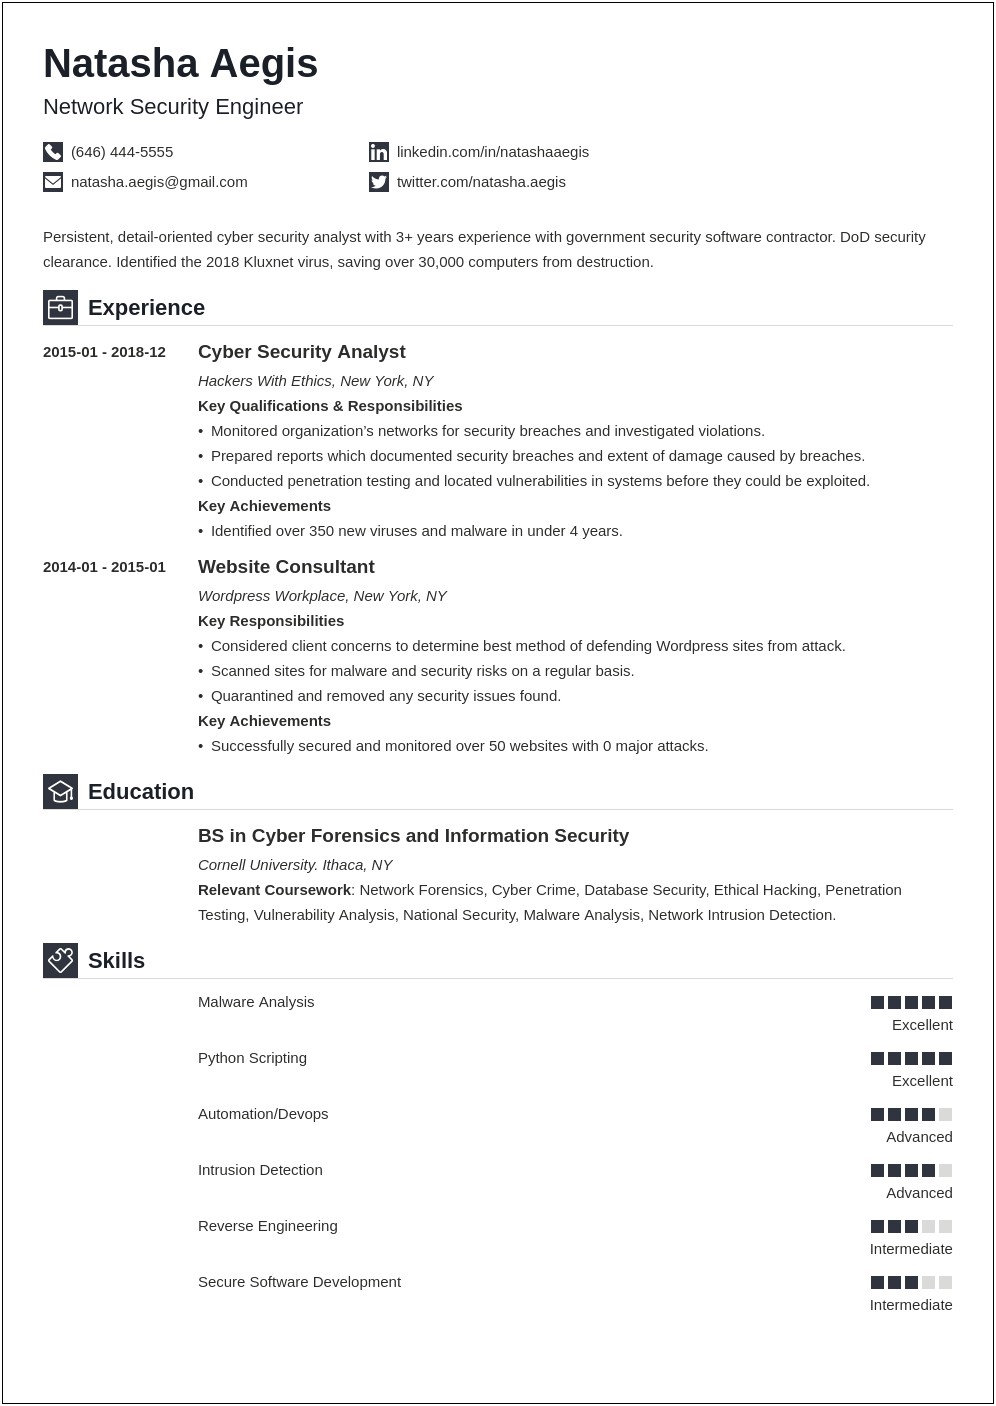 Military Information Assurance Manager Resume